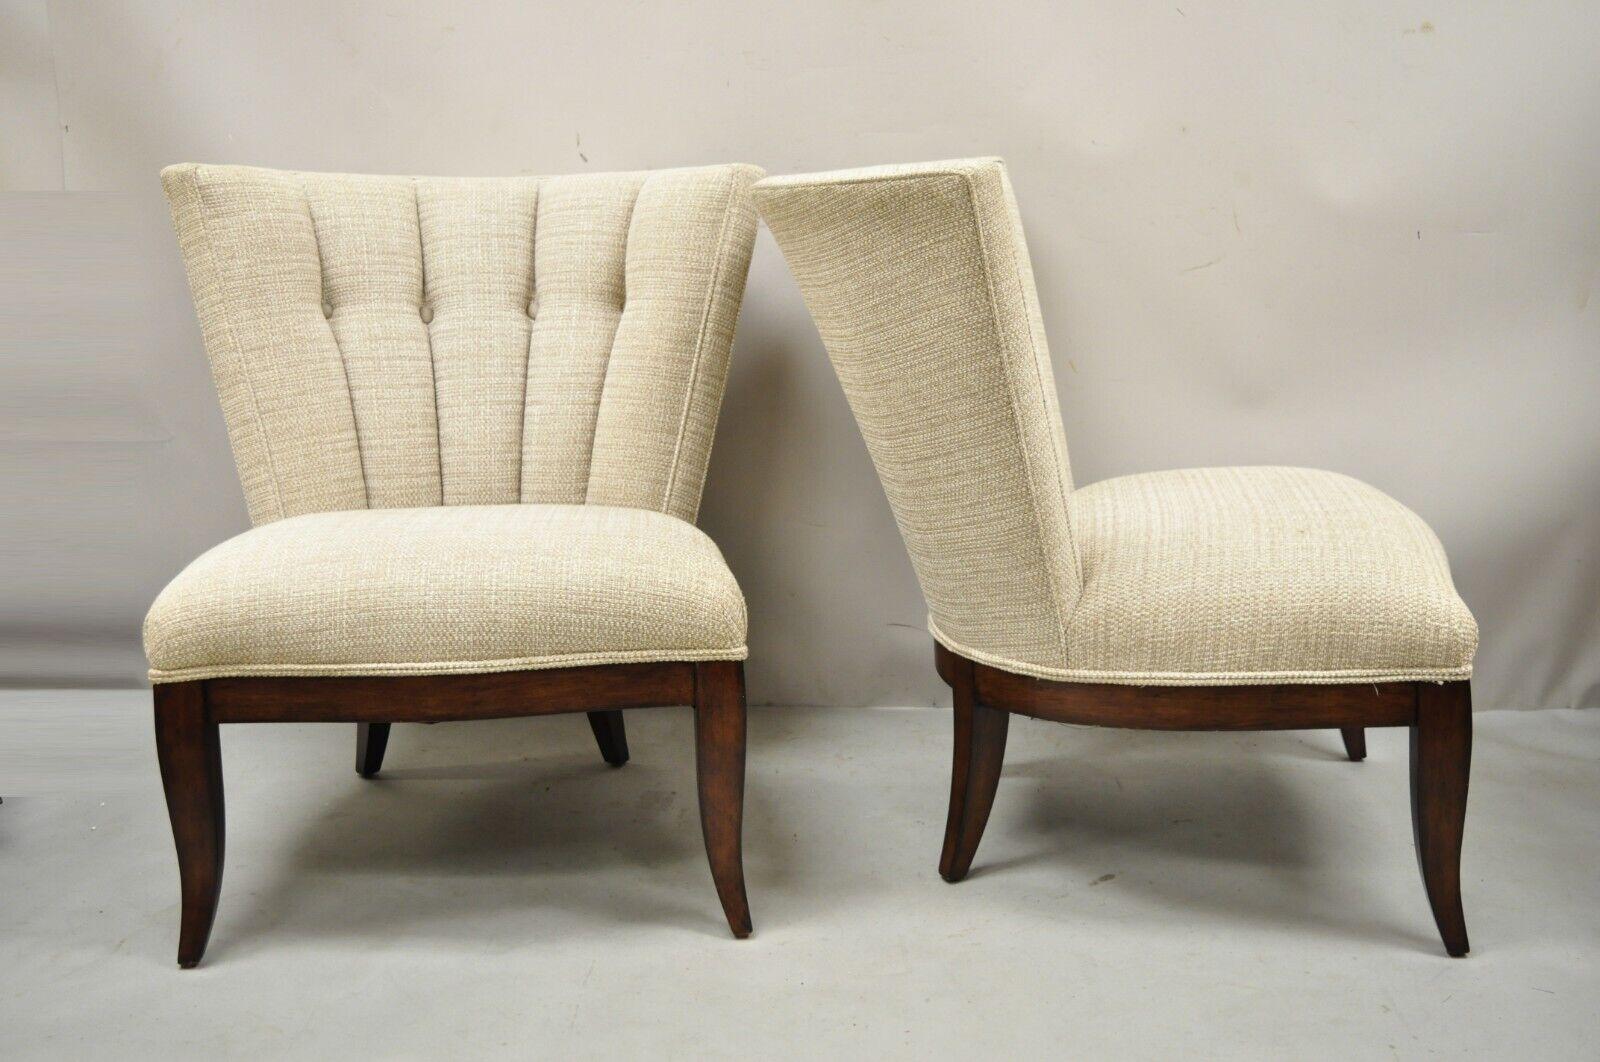 Schnadig heritage portfolio Ava slipper lounge chair - a pair. Item features tufted channel back, nice wide frames, solid wood construction, great style and form.
late 20th century - early 21st century. Measurements: 35